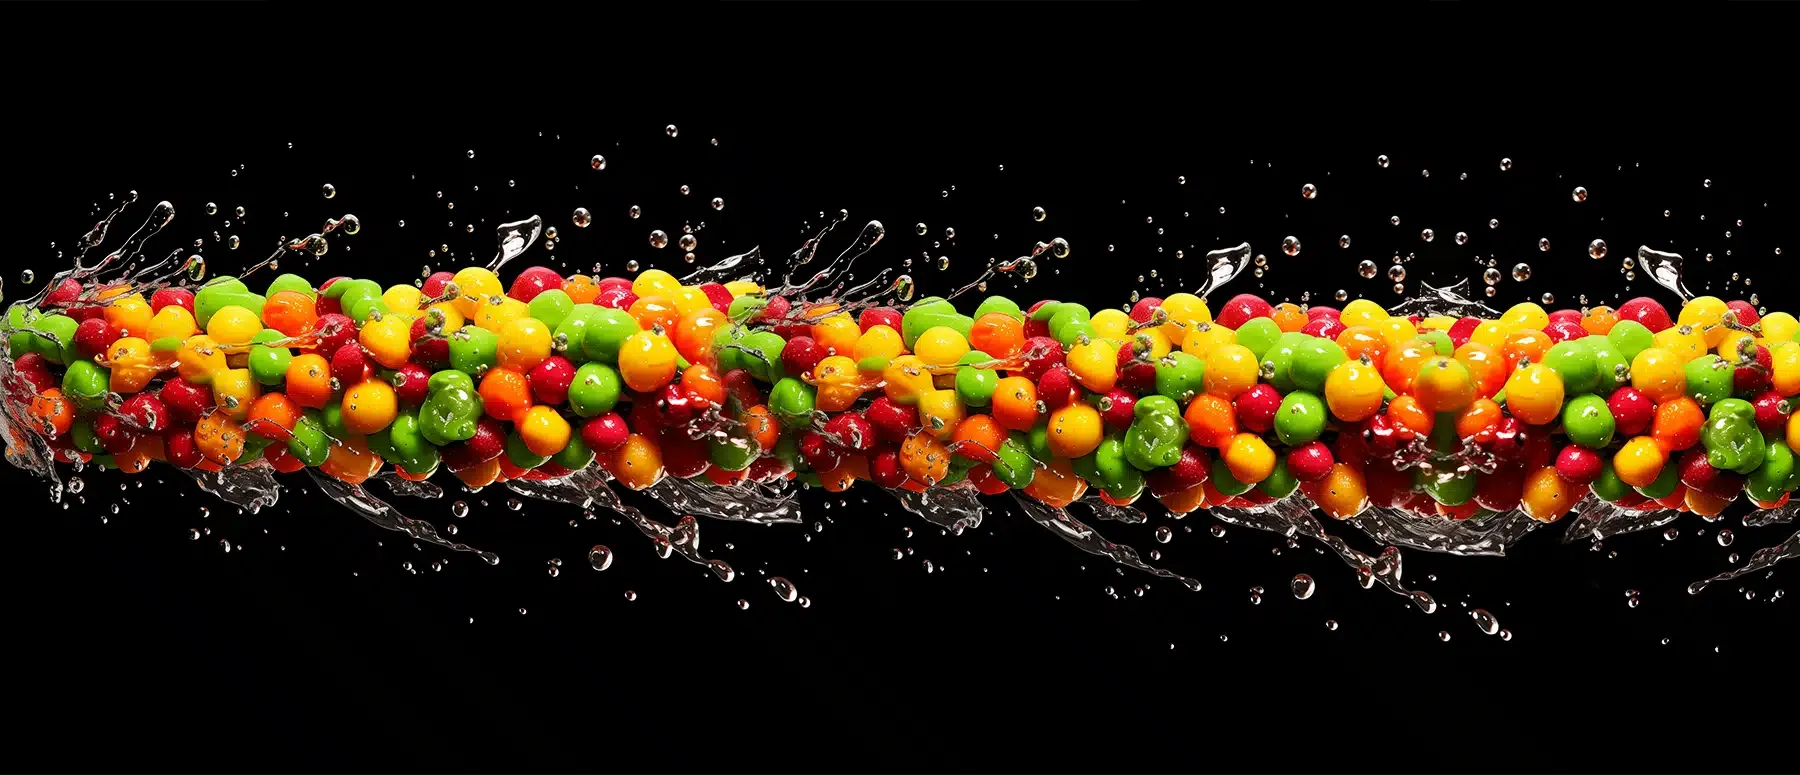 A Nerd rope edible on a black ground in high definition.